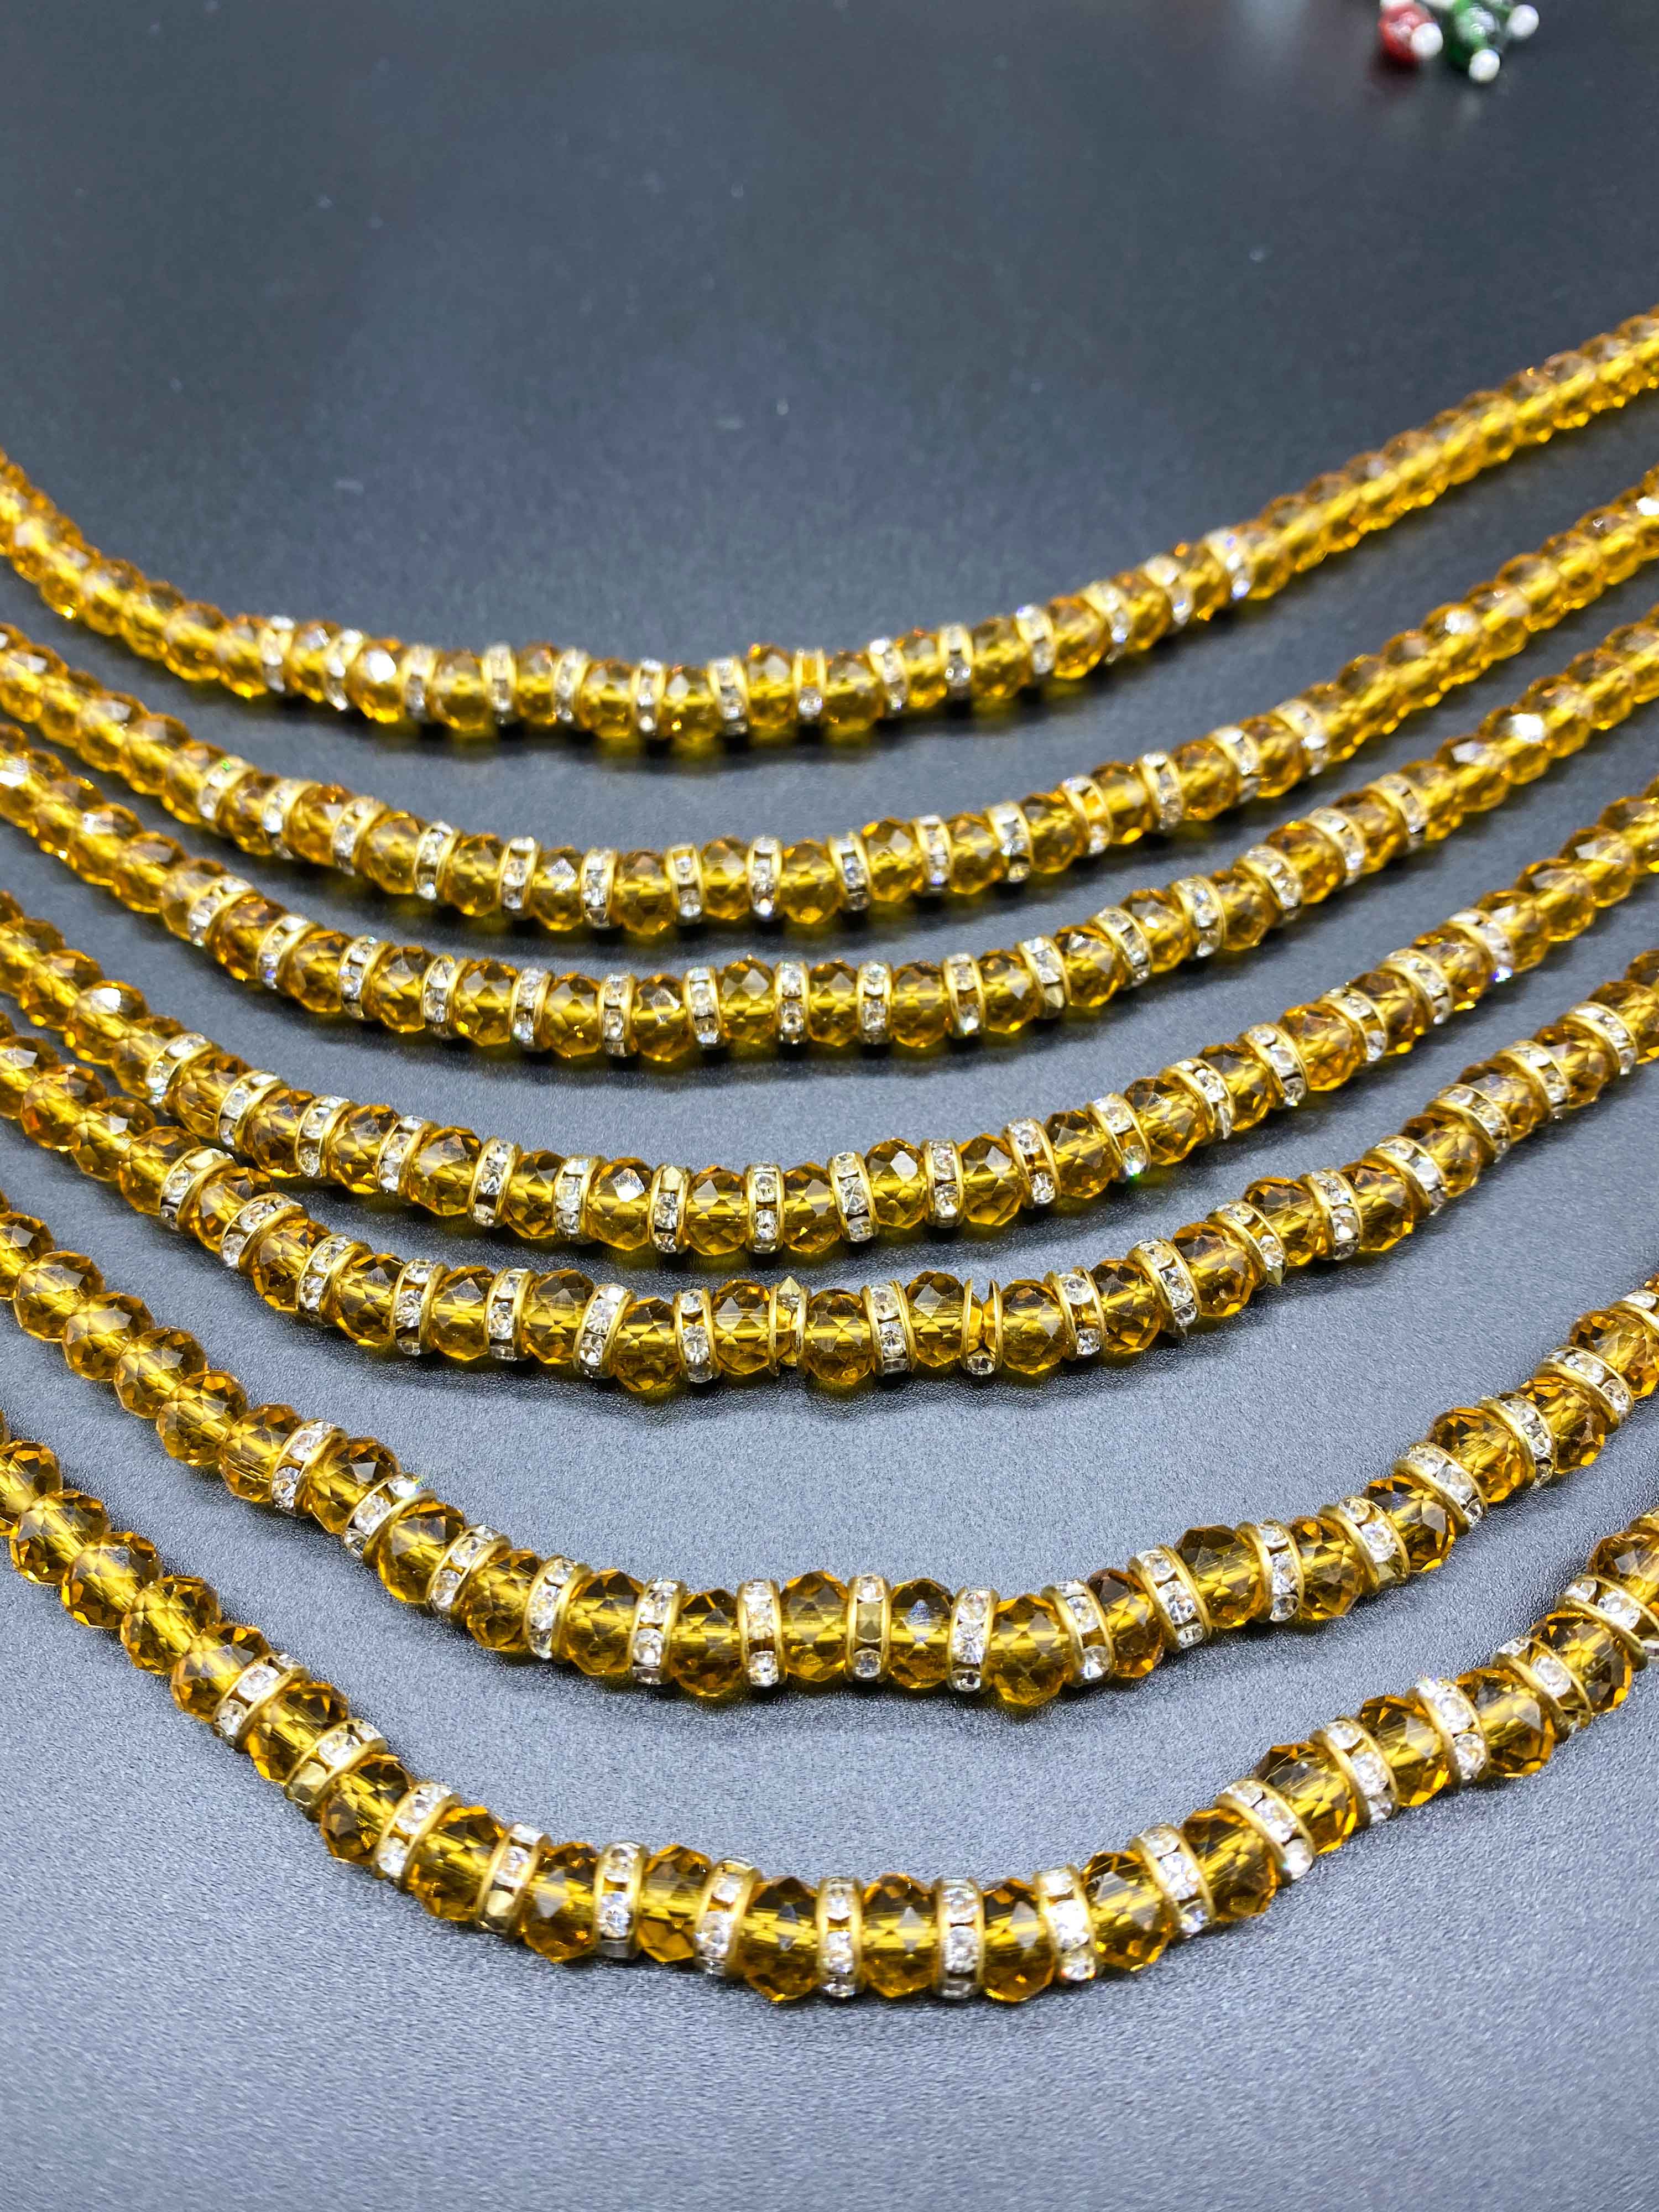 Crystal Haar Indian Necklace set with Tikka and Earrings Gold - Desi Posh